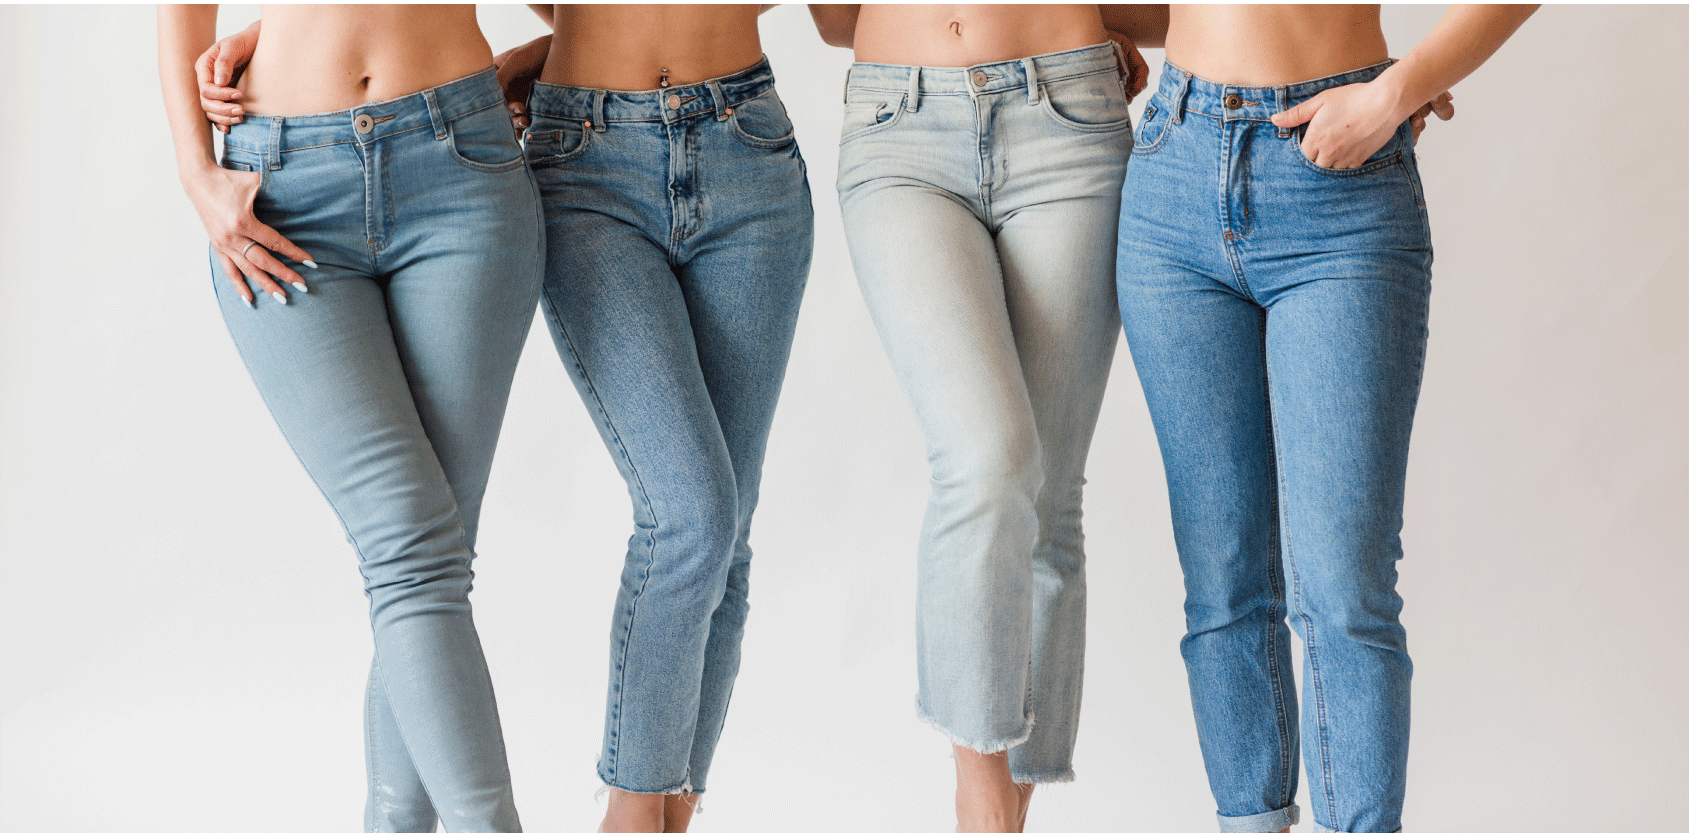 HIGH RISE JEANS